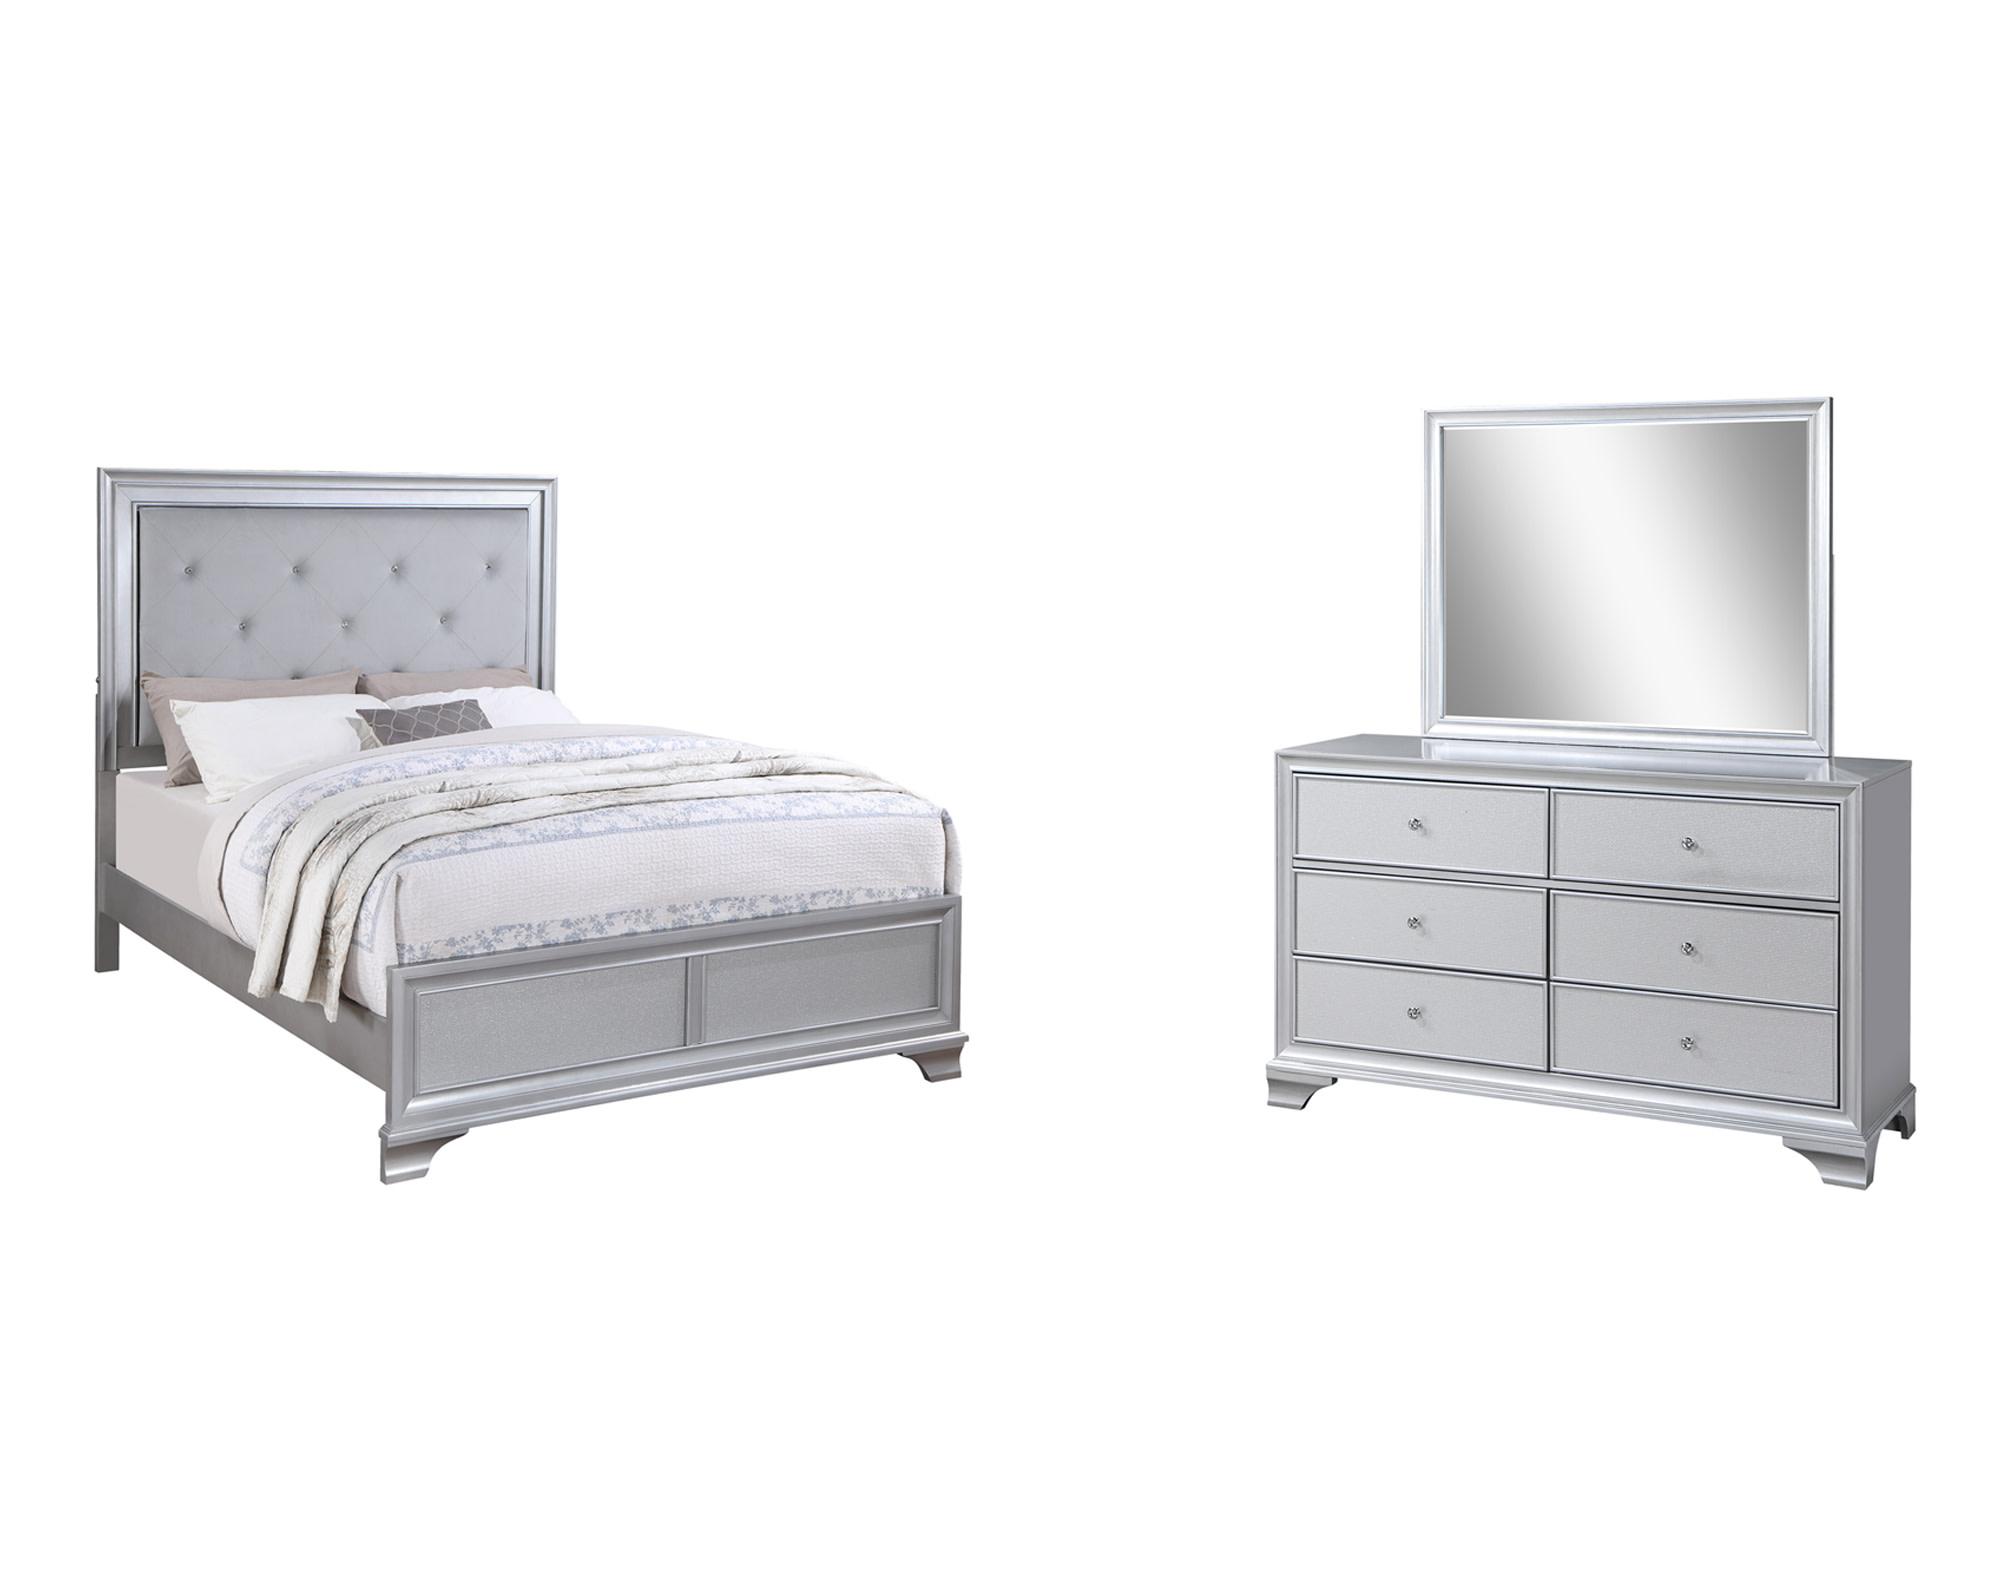 Gemma Silver Queen 3PC Bedroom Set with LED